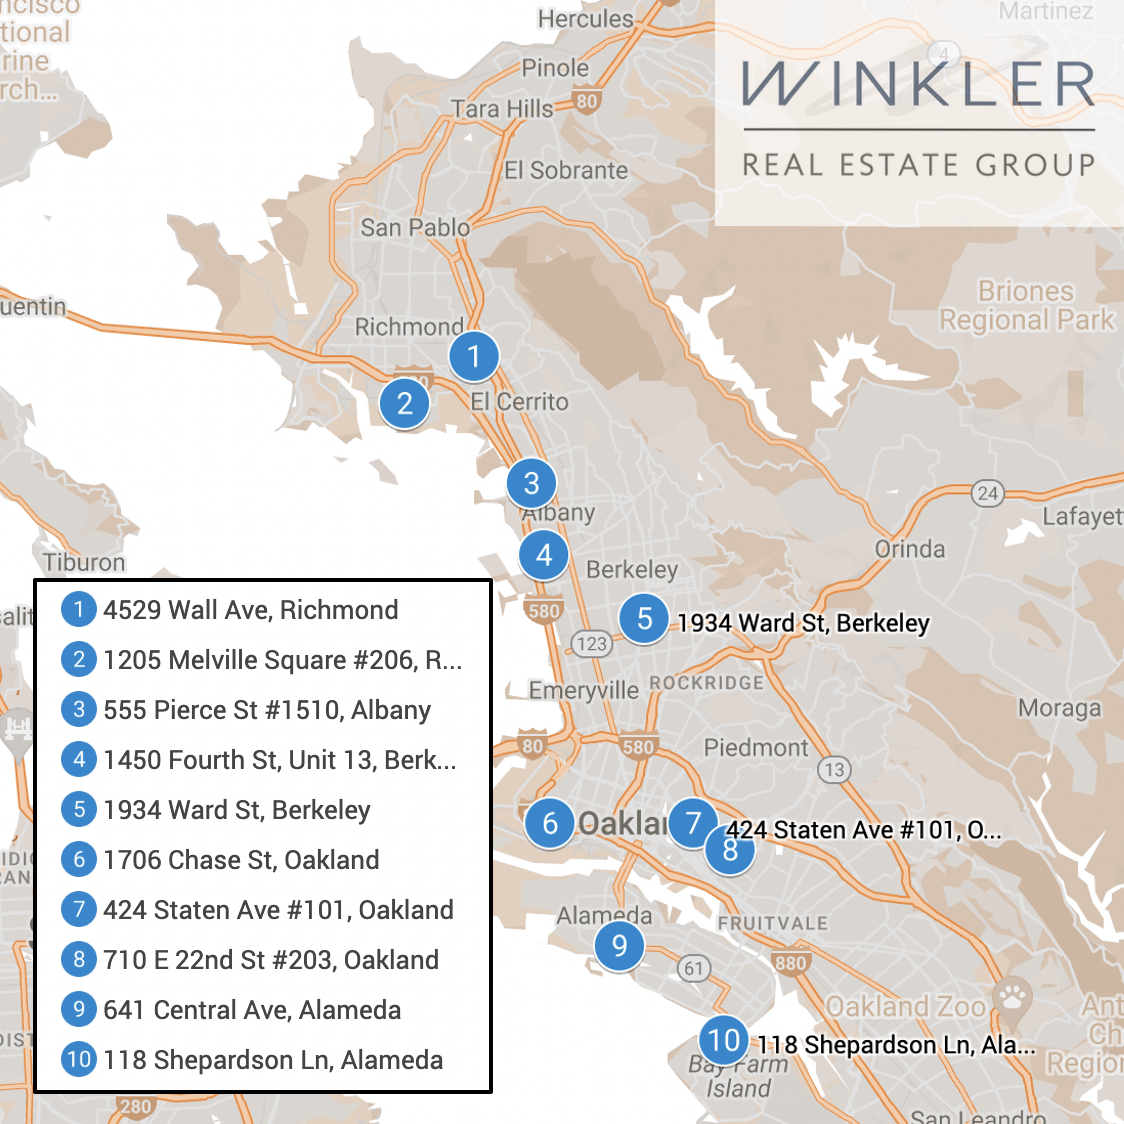 🎈 Open House Weekend w/ Winkler REG!

🗺️ Visit our map for details: ow.ly/KYcw50RwxL4

#RealEstate #OpenHouse #RealEstateForSale #RealEstateAgency #CaliforniaRealEstate #SFBayArea #BayAreaRealEstate #RealEstateInvestments #RealEstateListing #ResidentialRealEstate